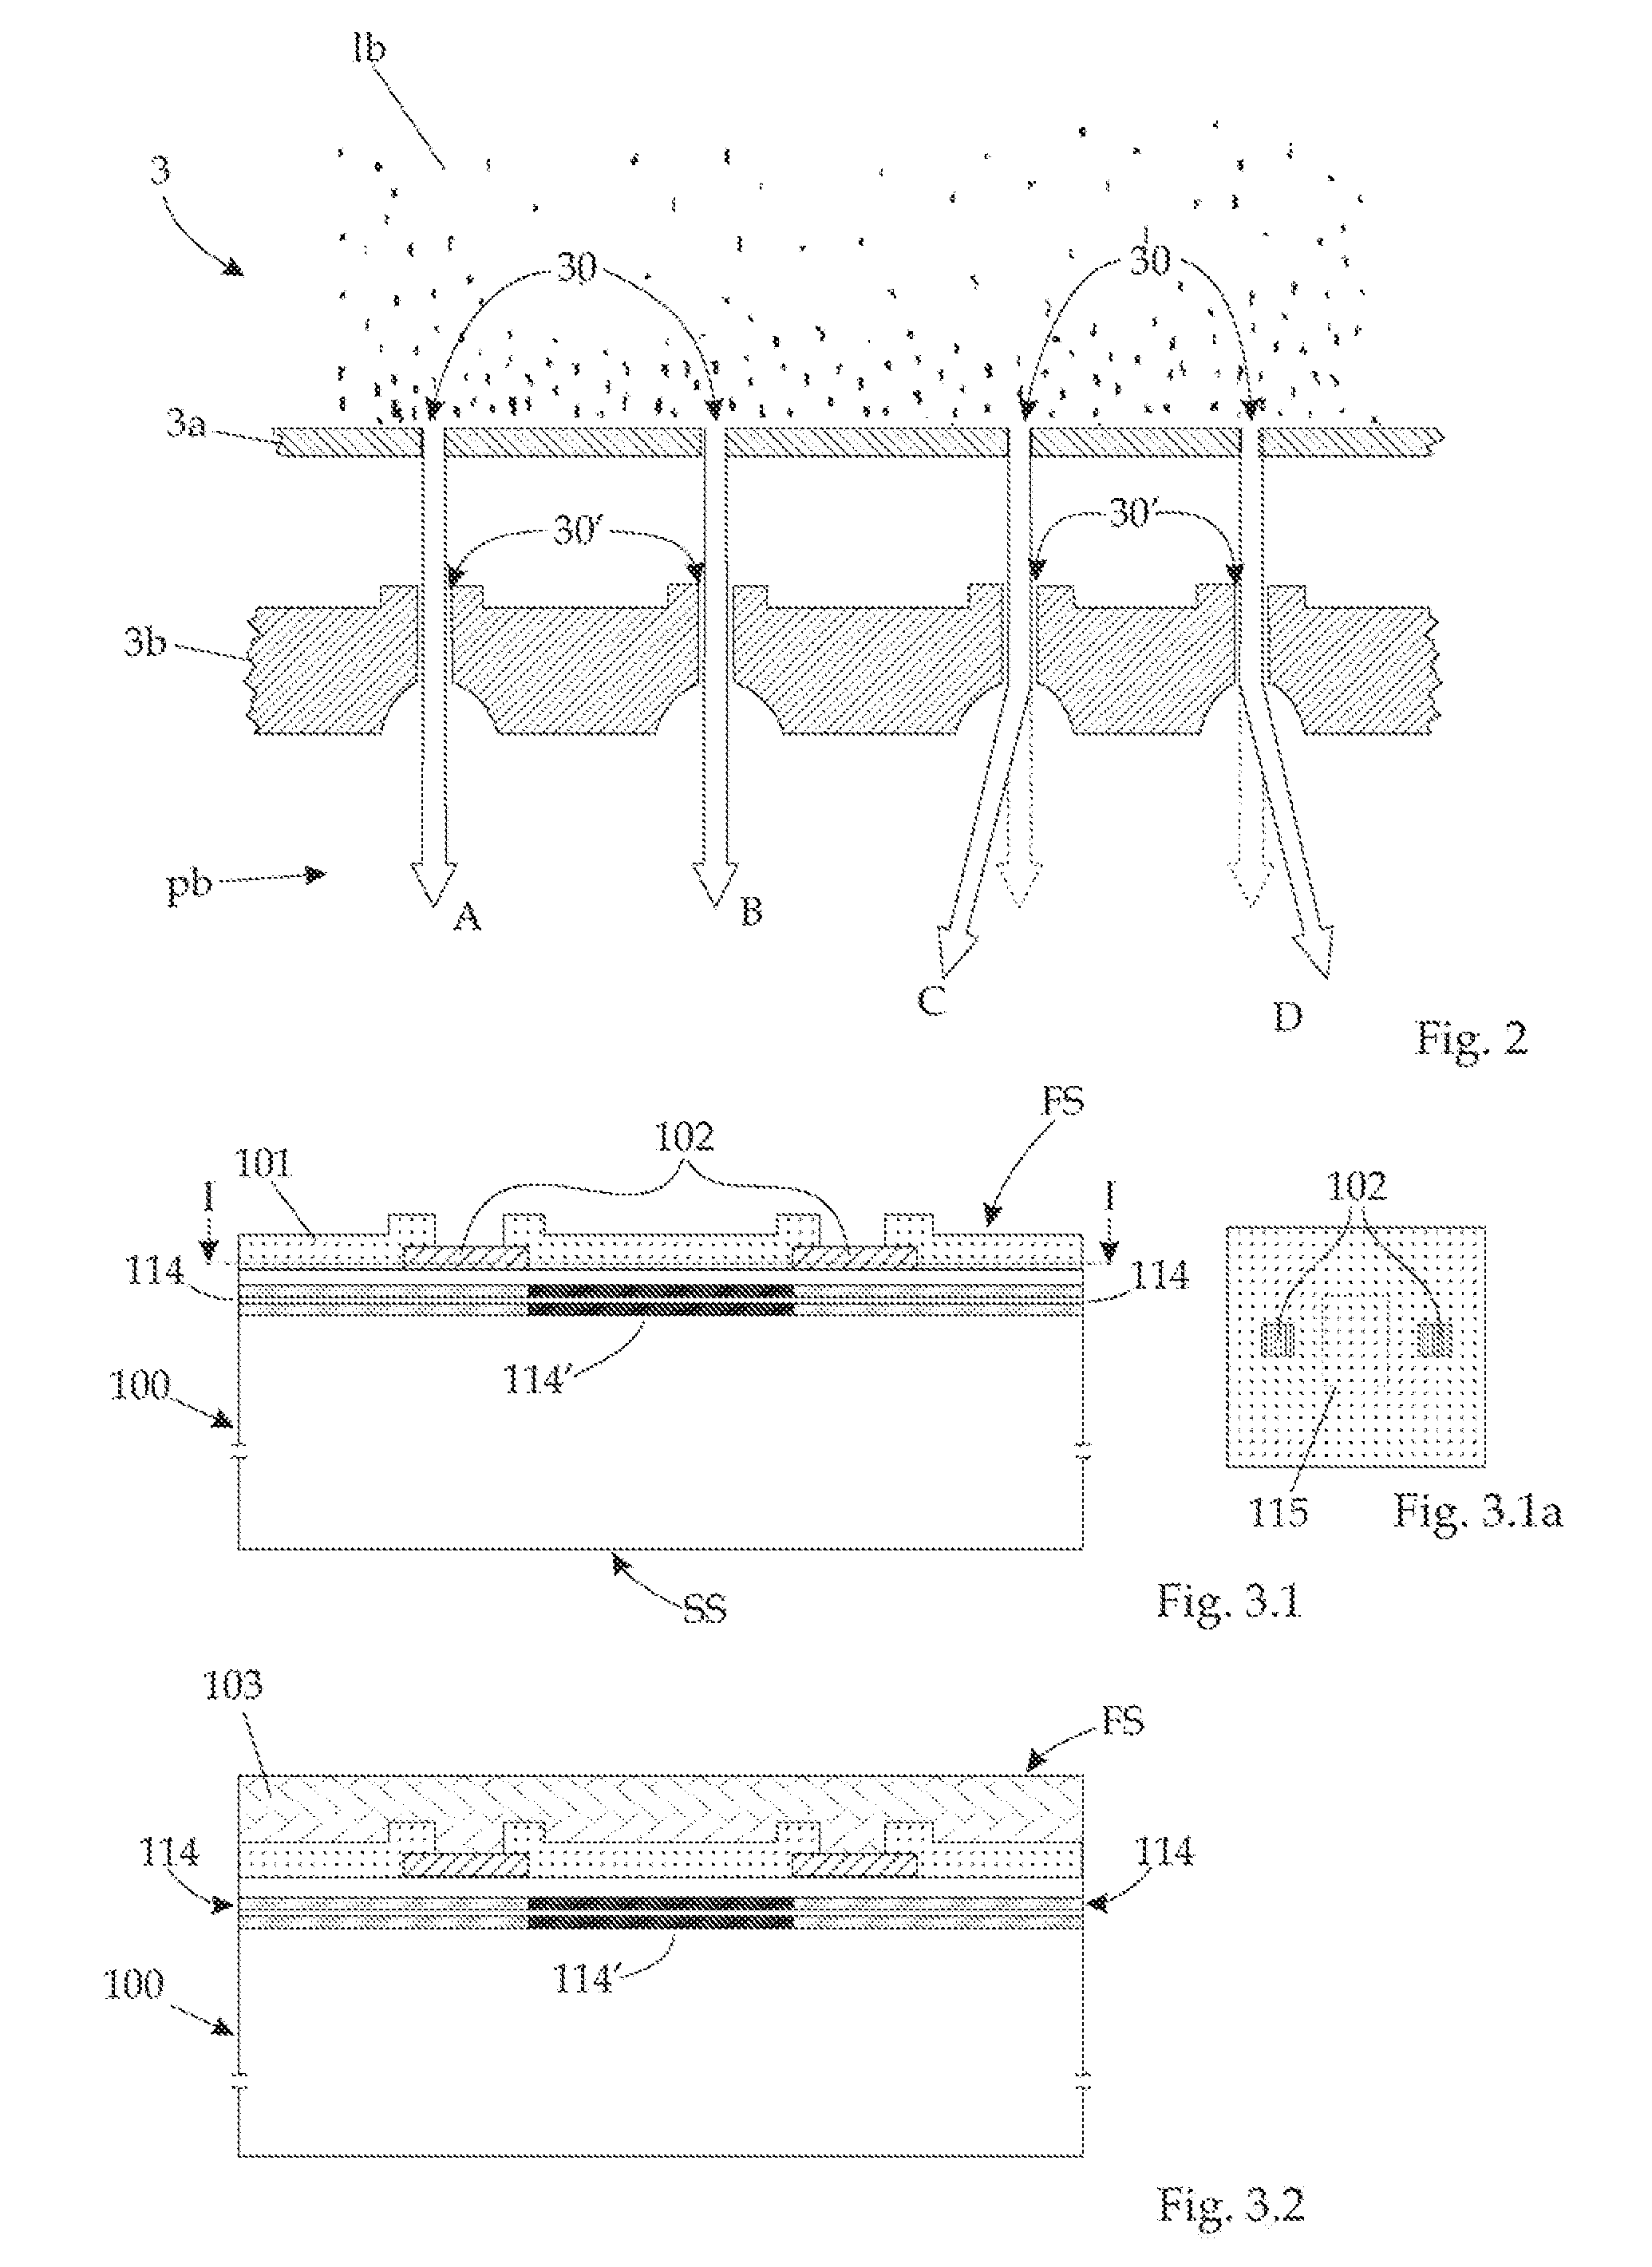 Method for producing a multi-beam deflector array device having electrodes